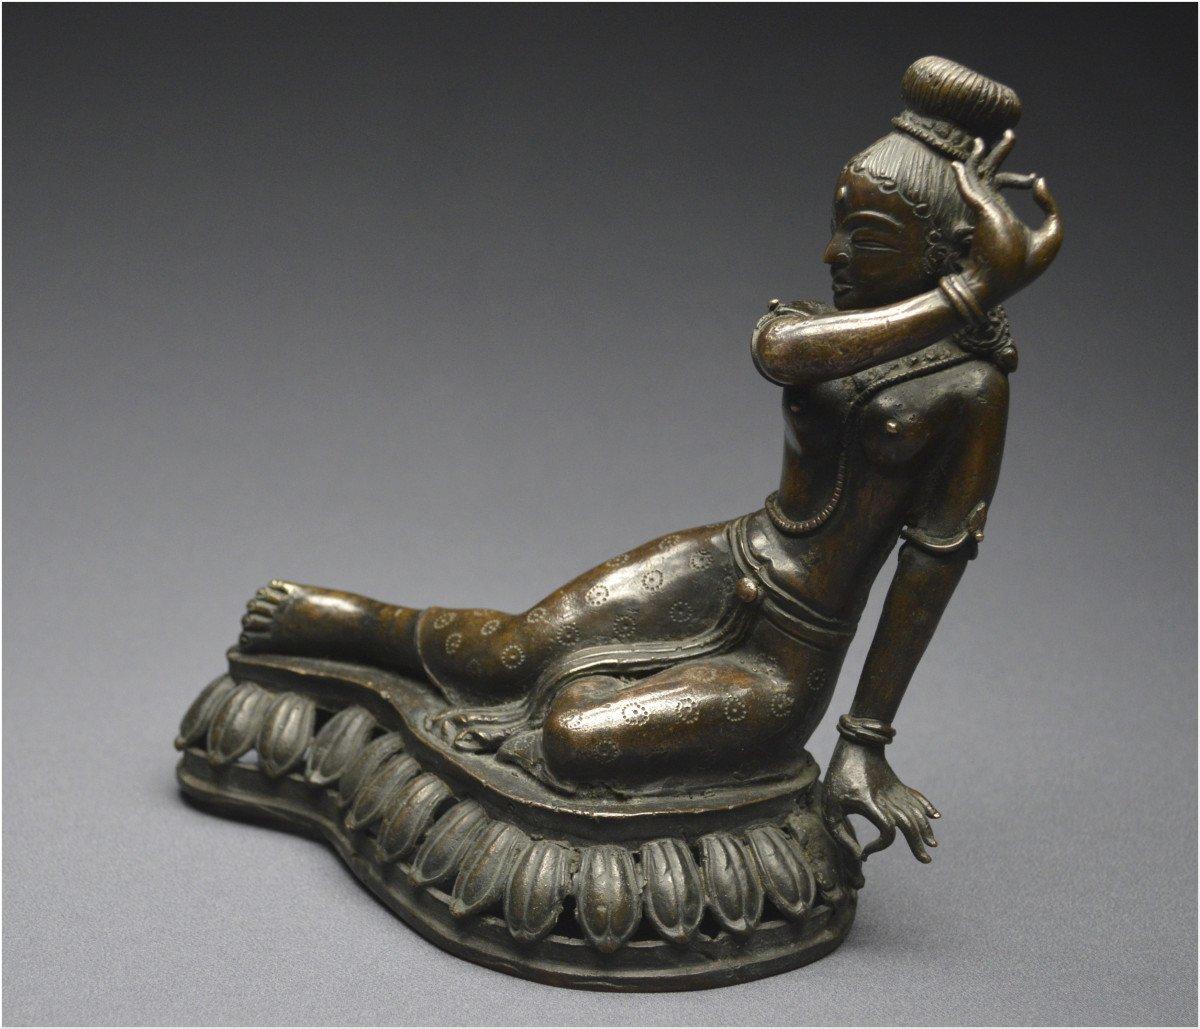 Representation in copper alloy of a Deva with her hands in an argument position

Nepal
19th century

The goddess is represented with her legs stretched out on a base decorated with openwork lotus leaves, the bust straight, bare. The left arm